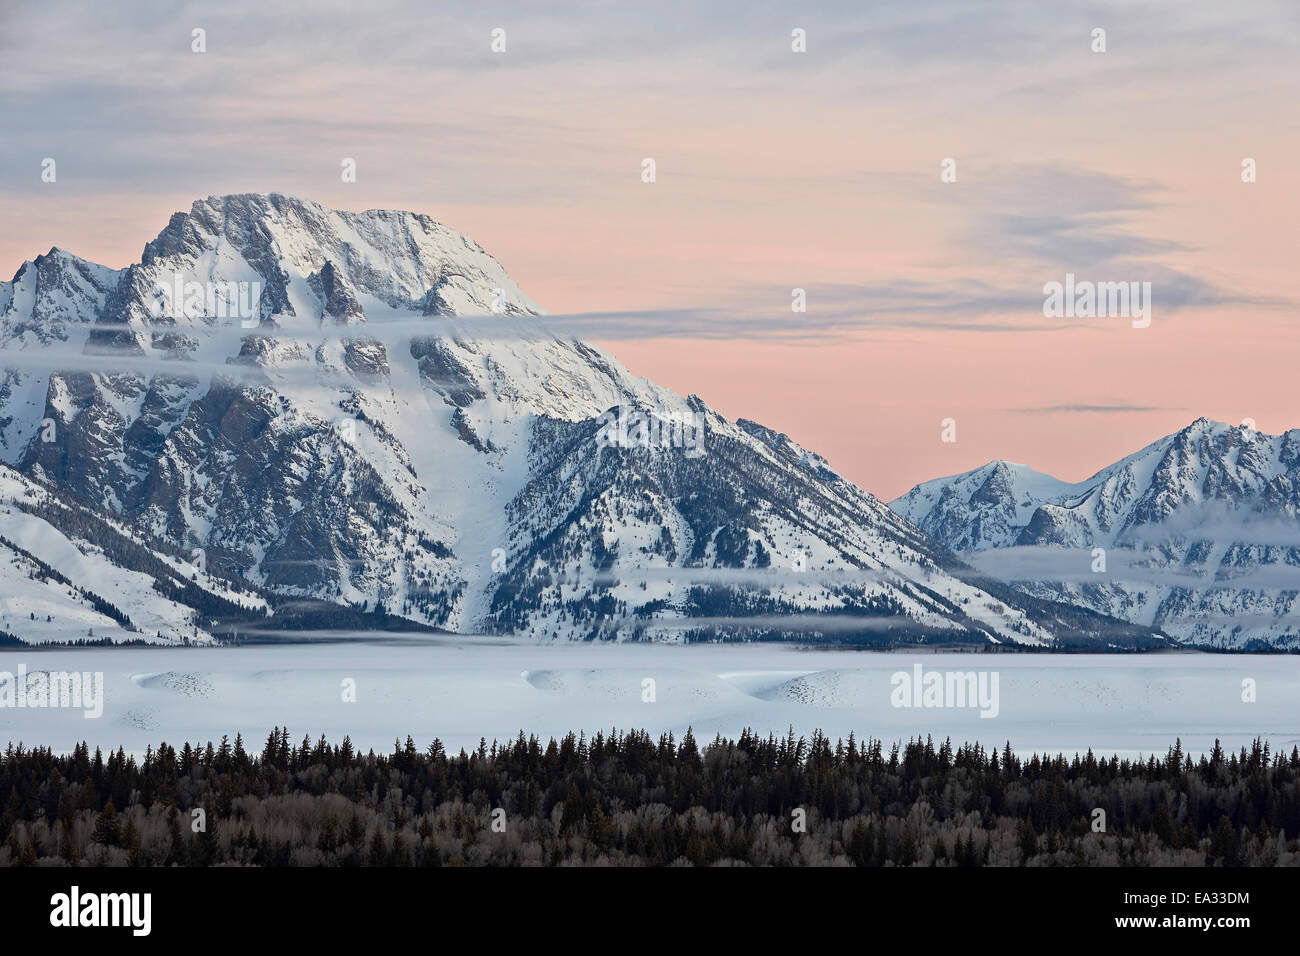 Mount Moran at dawn in the winter, Grand Teton National Park, Wyoming, United States of America, North America Stock Photo